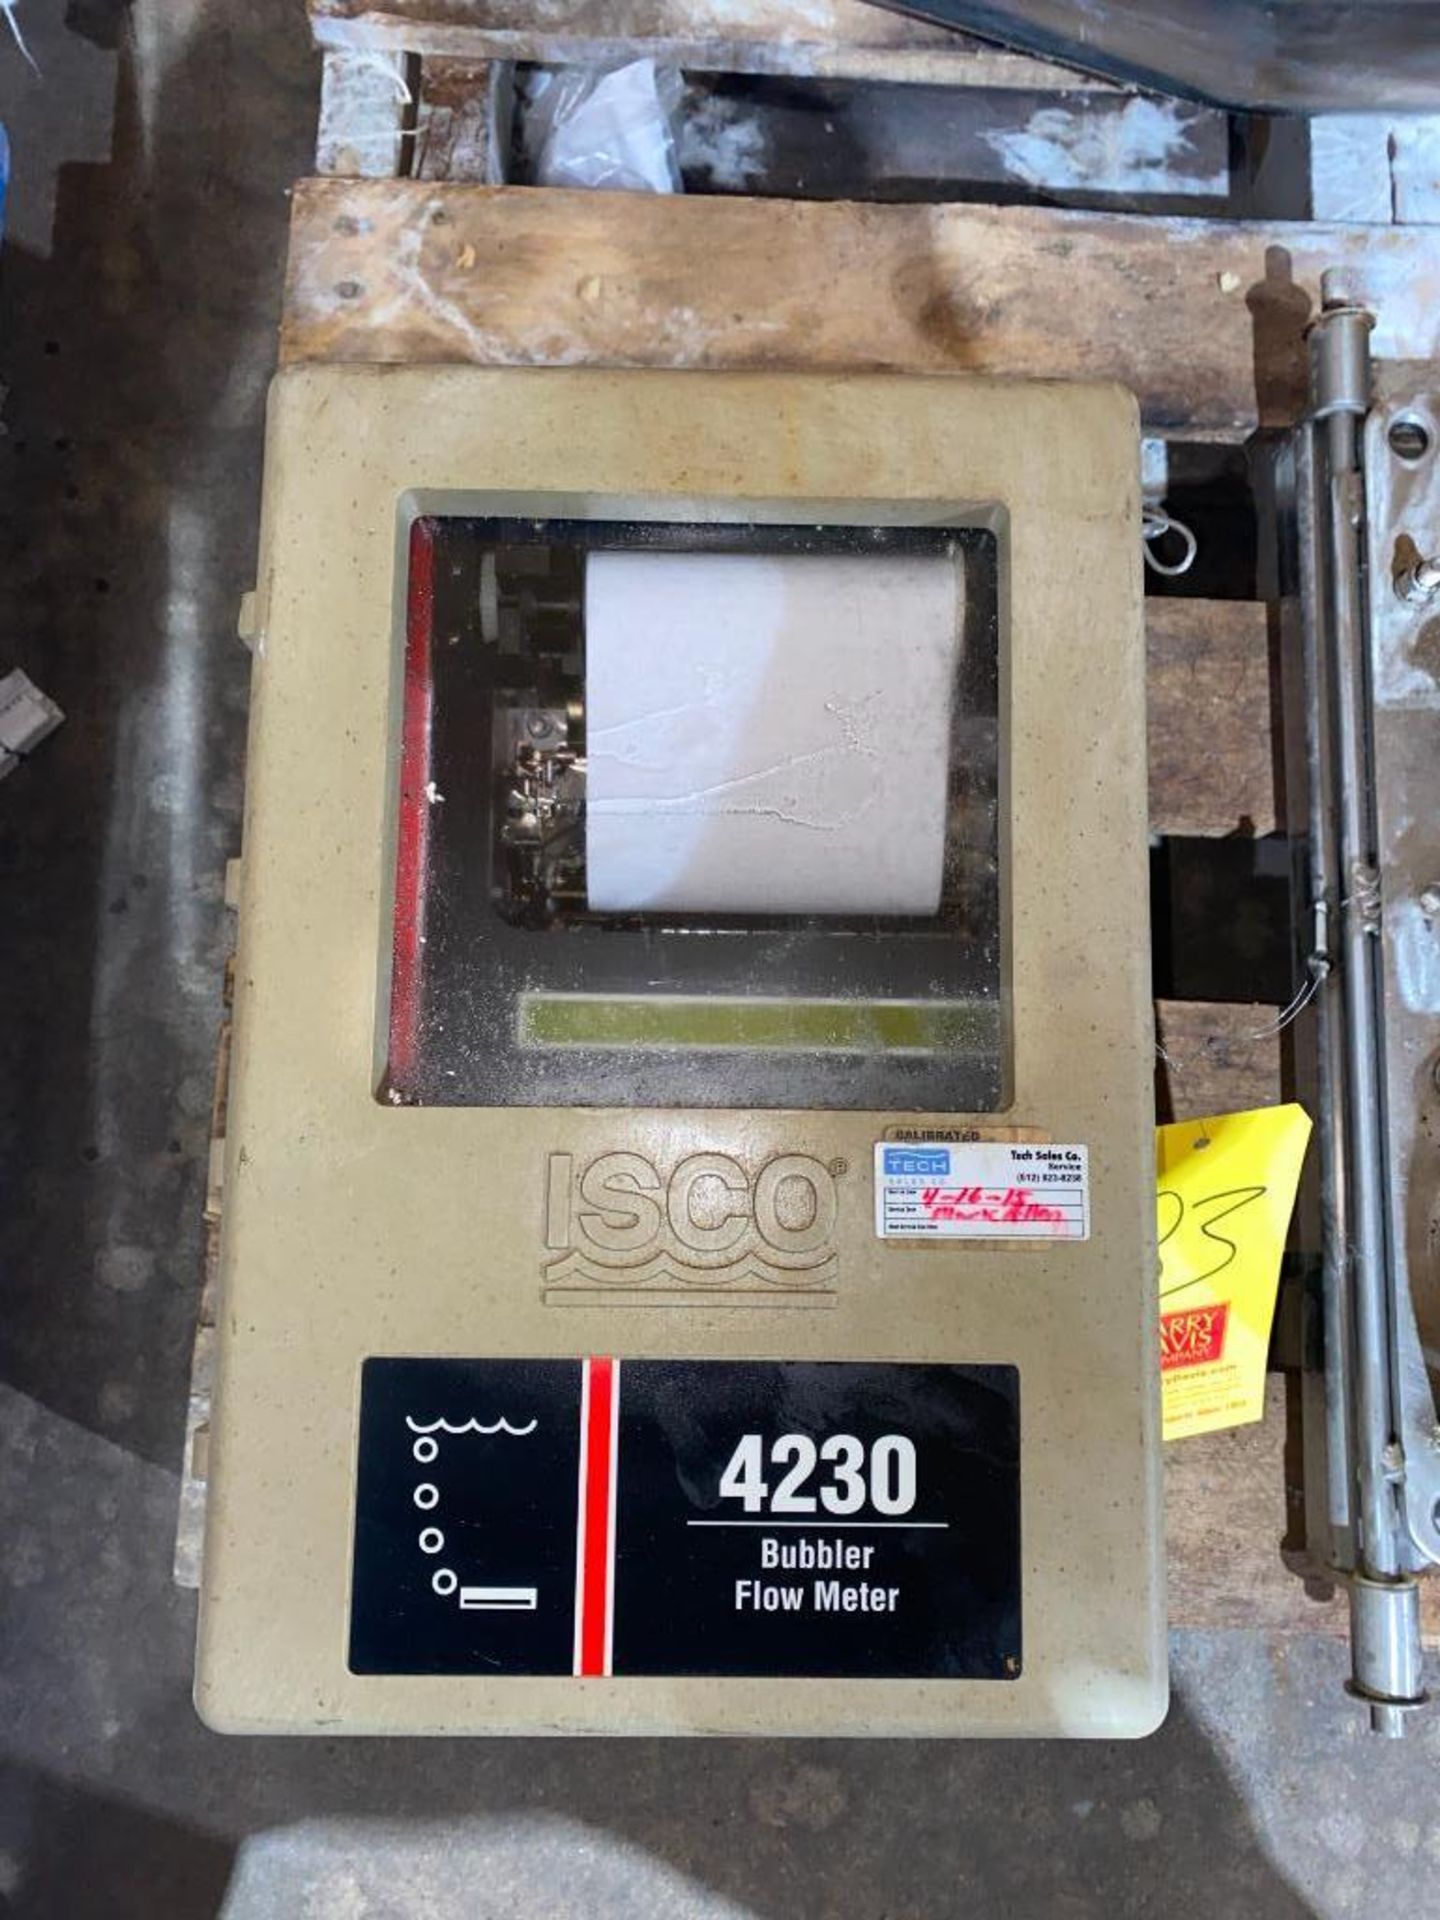 Isco 4230 Bubbler Flow Meter with Printer (Location: Rice Lake, WI) - Rigging Fee: $50